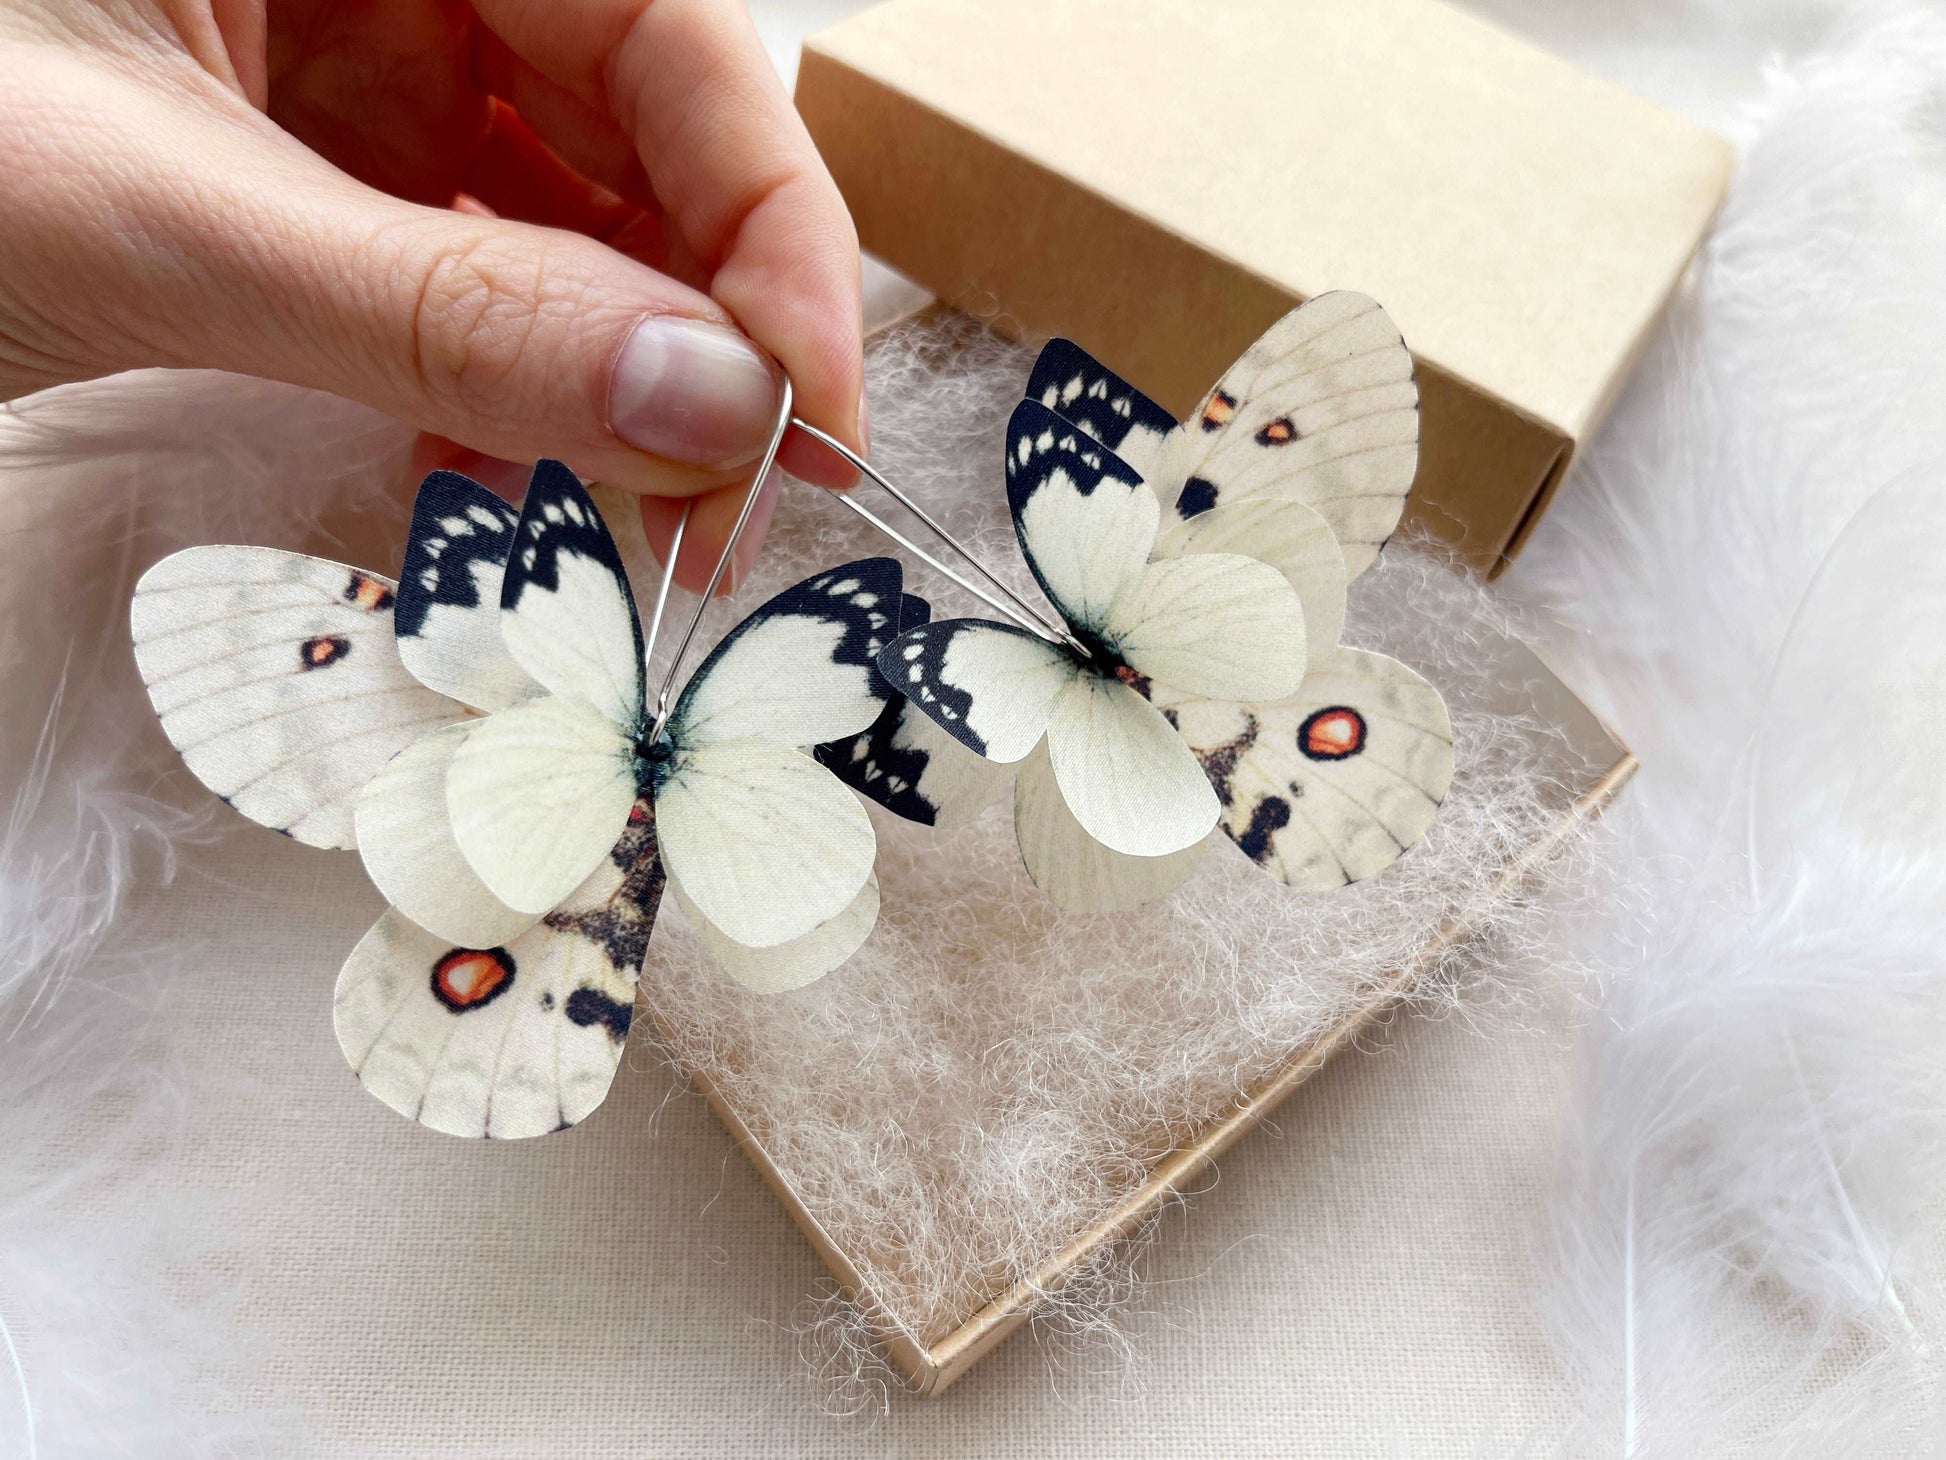 Dreamy ivory butterfly wing earrings for nature lovers